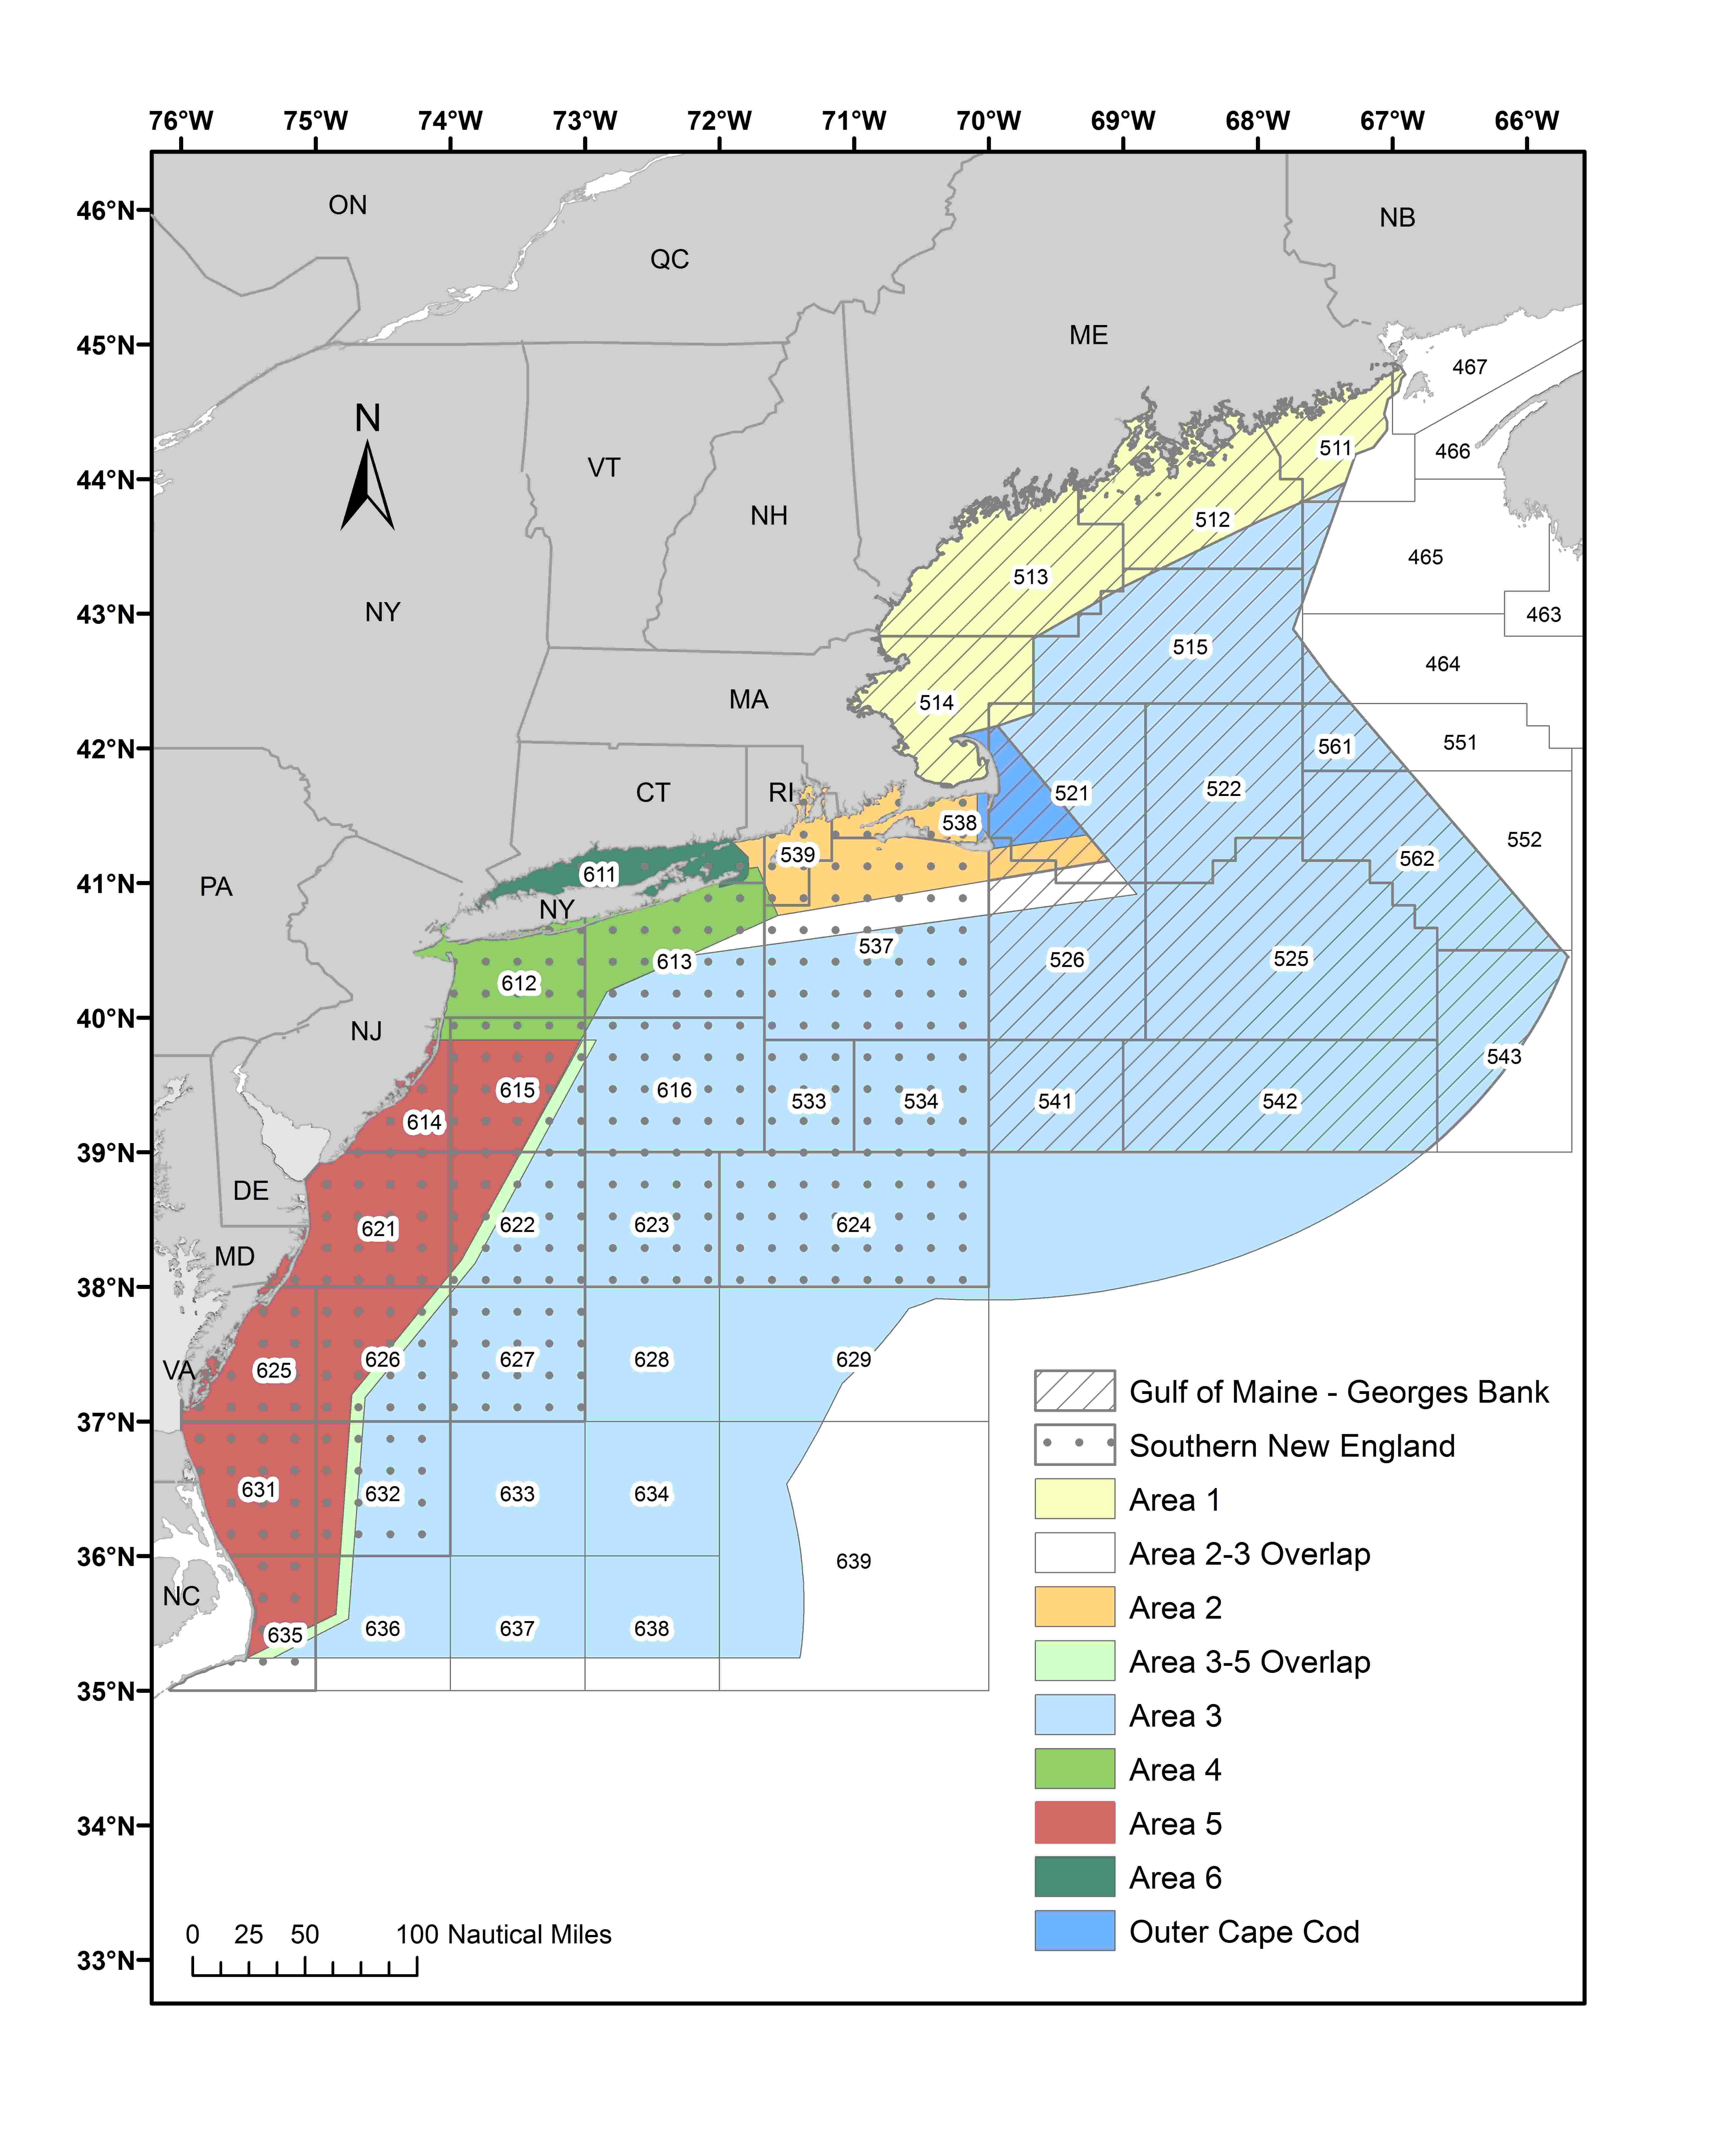 Lobster management areas marked in the Gulf of Maine